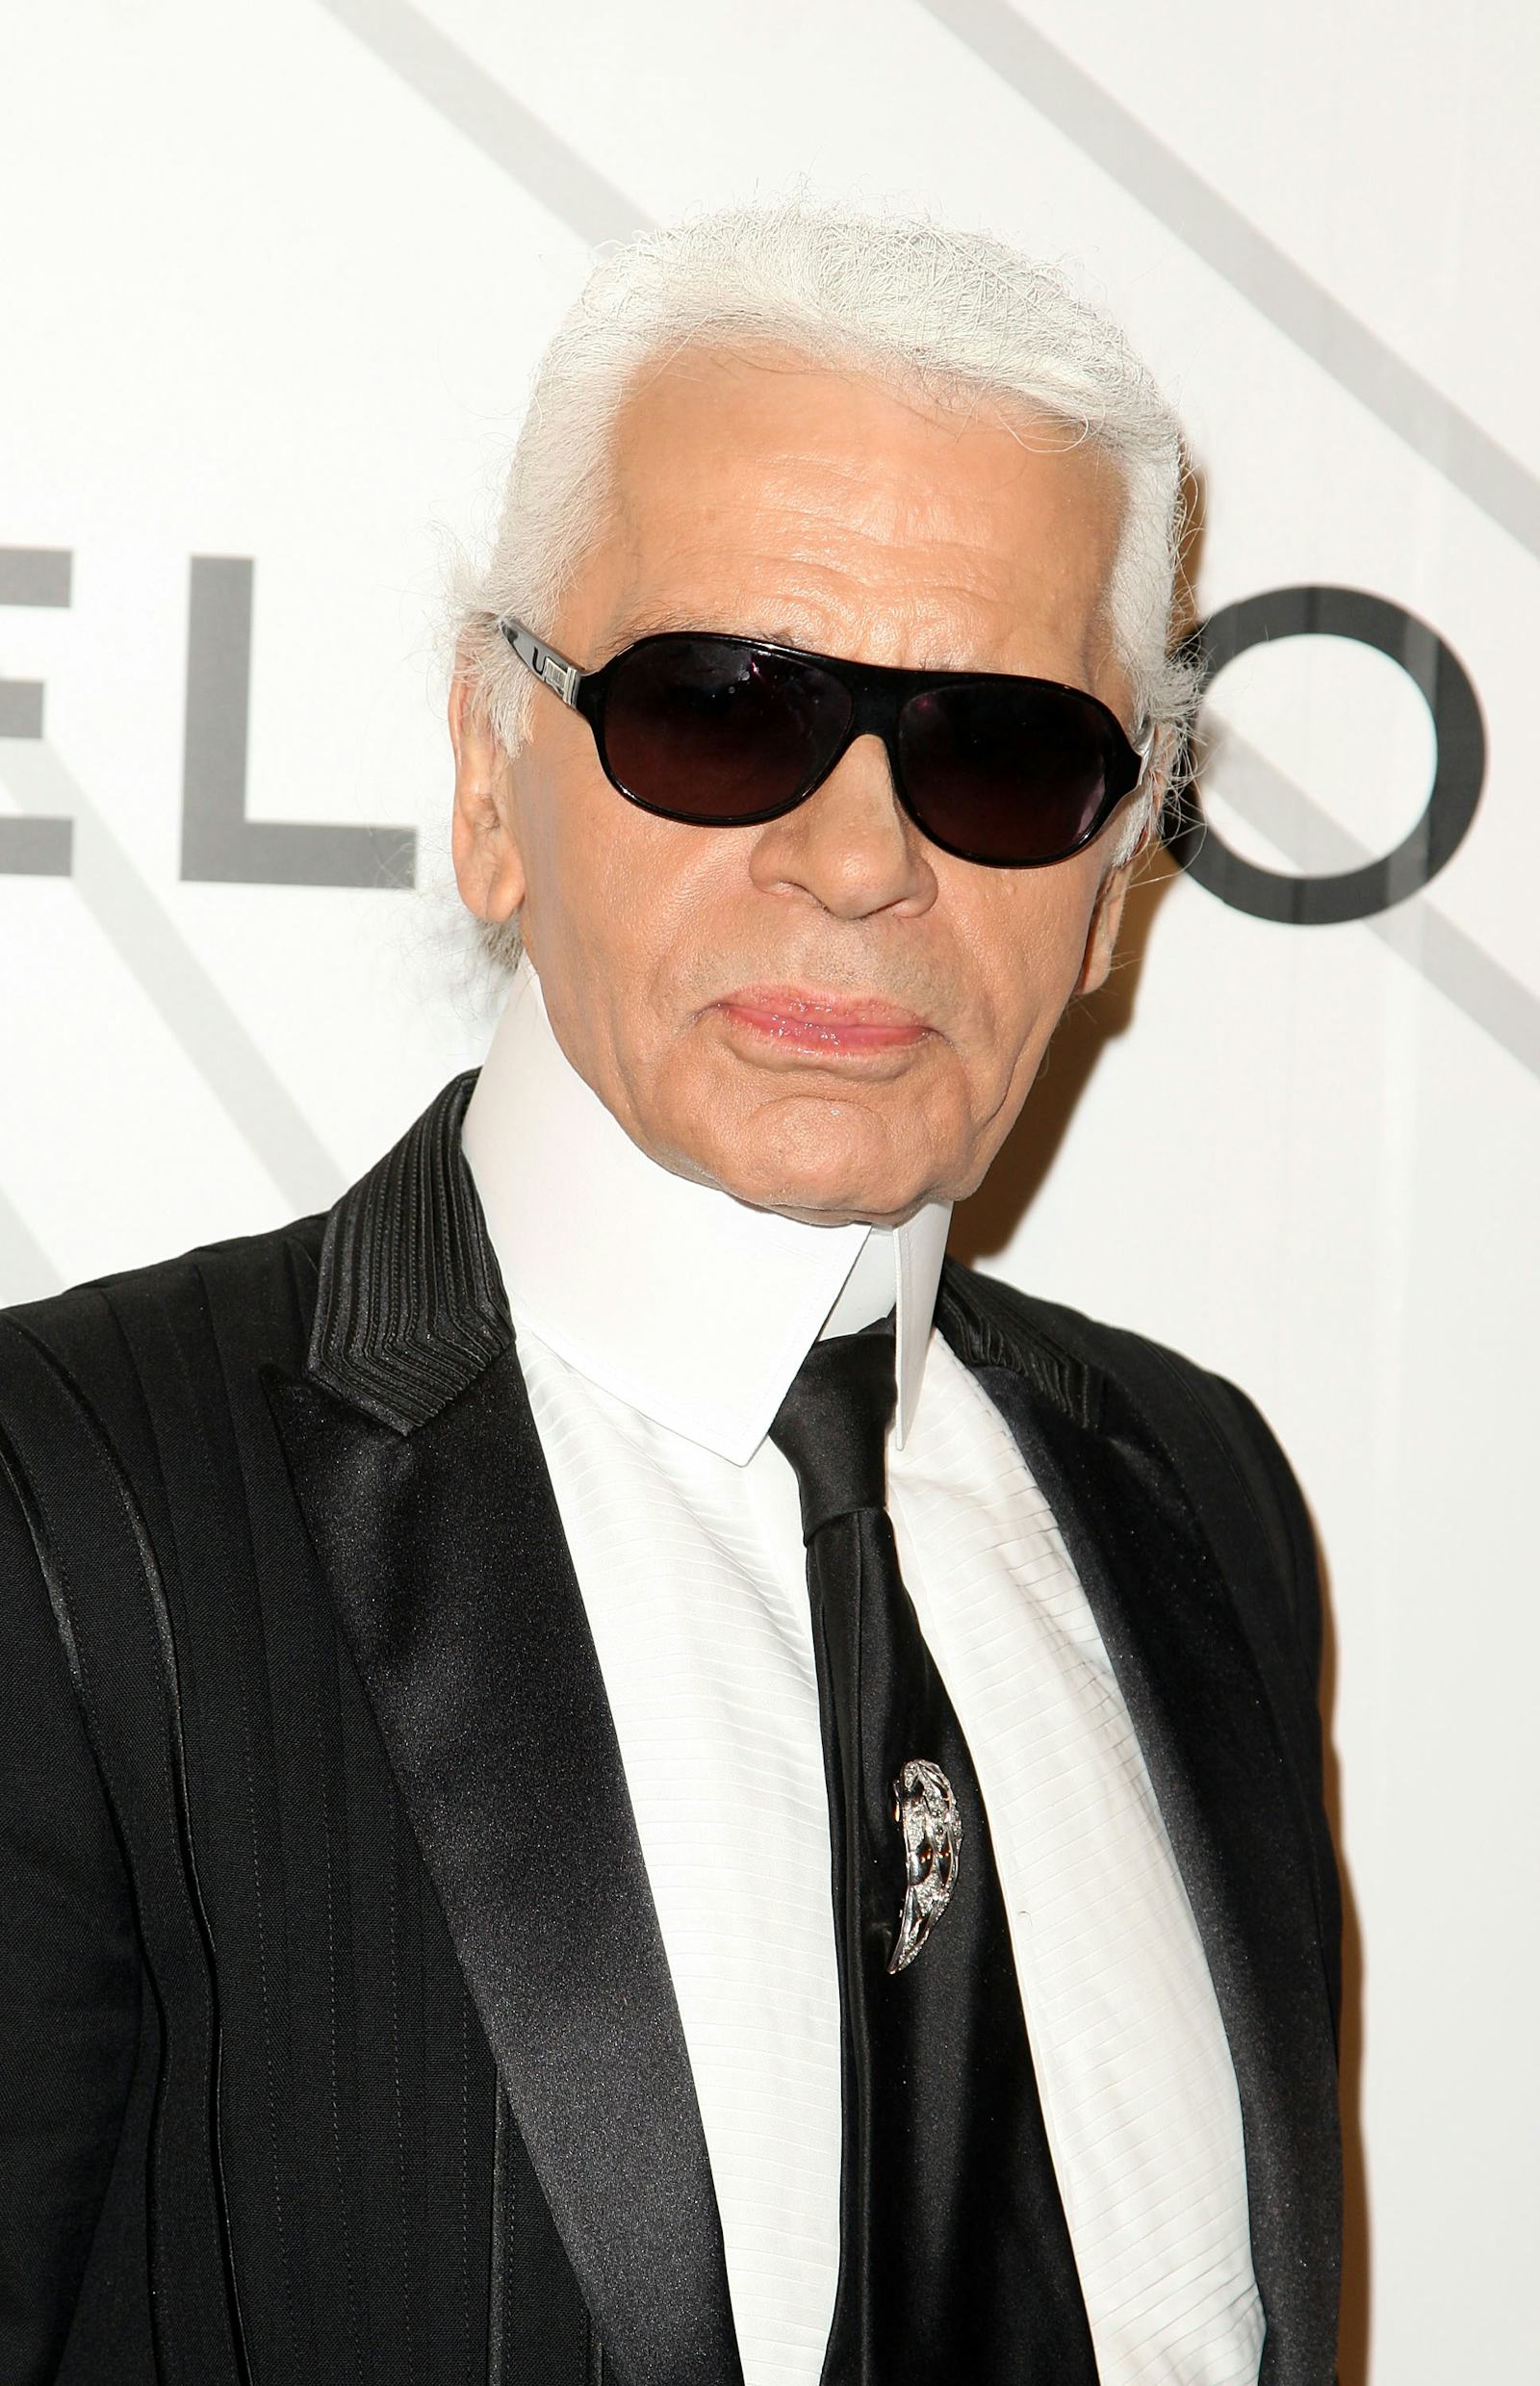 Karl Lagerfeld is Getting Sued For Making “Fat” Comments